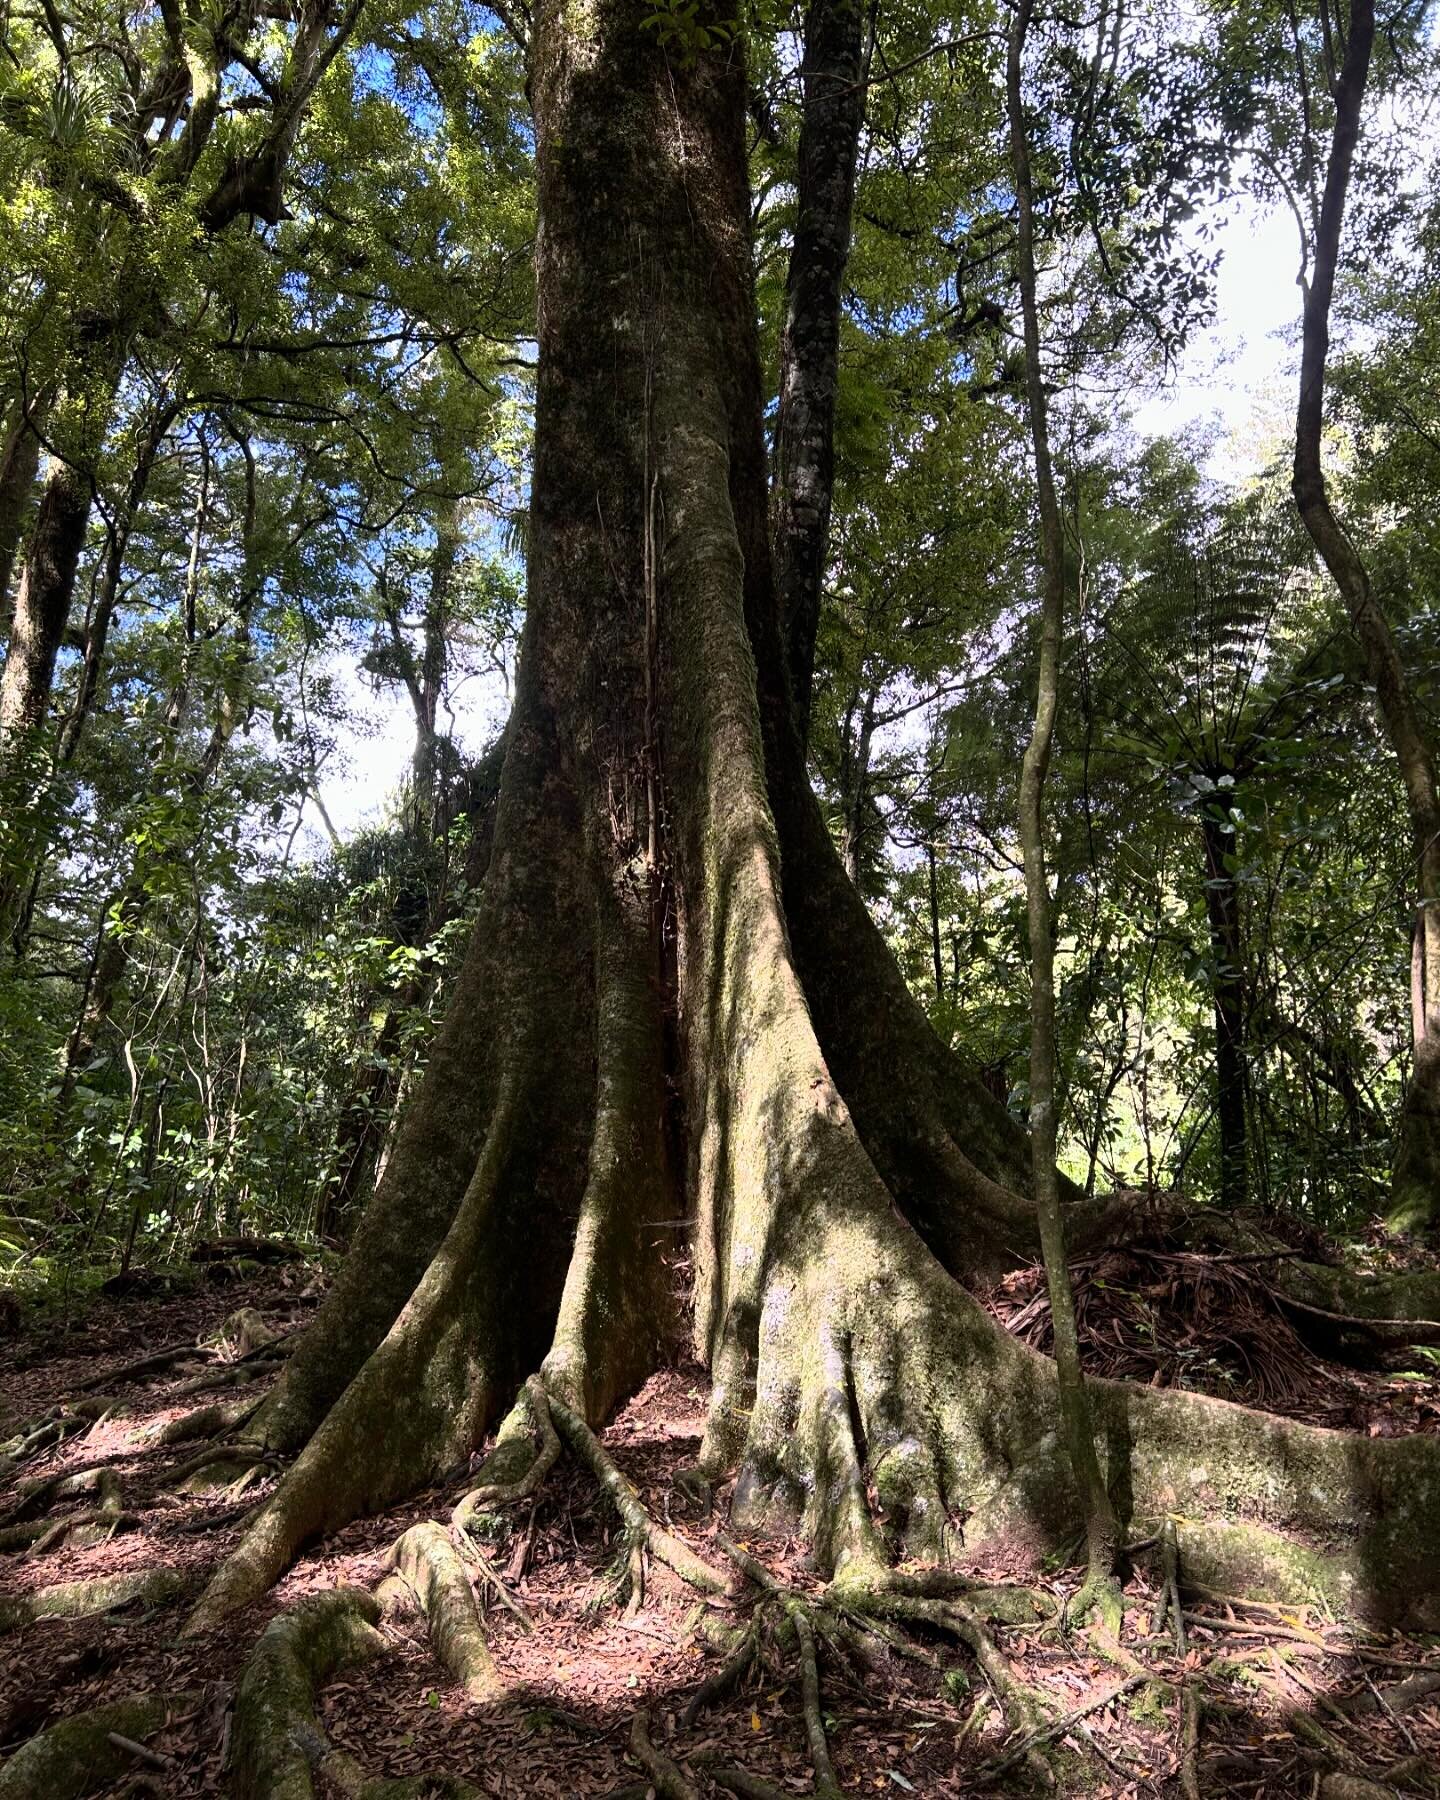 Another beautiful forest giant. This time a huge Pukatea, with massive plank buttresses. We meet many pukatea in Otanewainuku Forest. #otanewainukukiwitrust #nztrees #pukatea